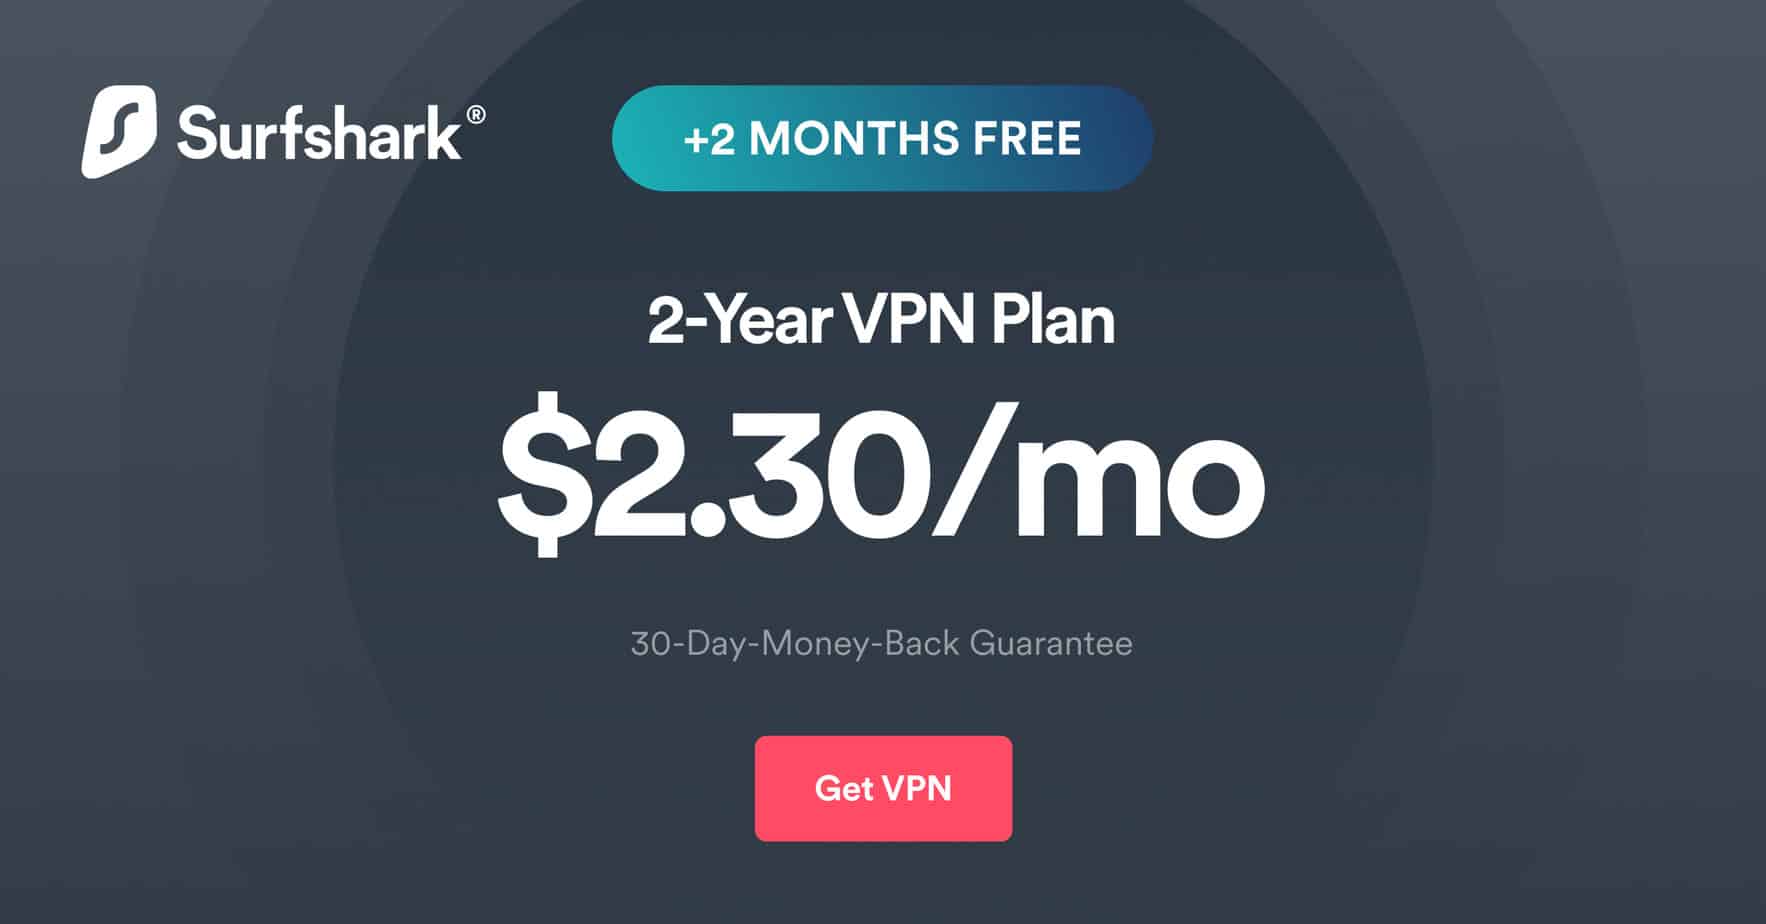 Surfshark Summer Sale: Get a 2-Year VPN Subscription and Antivirus Comes Free